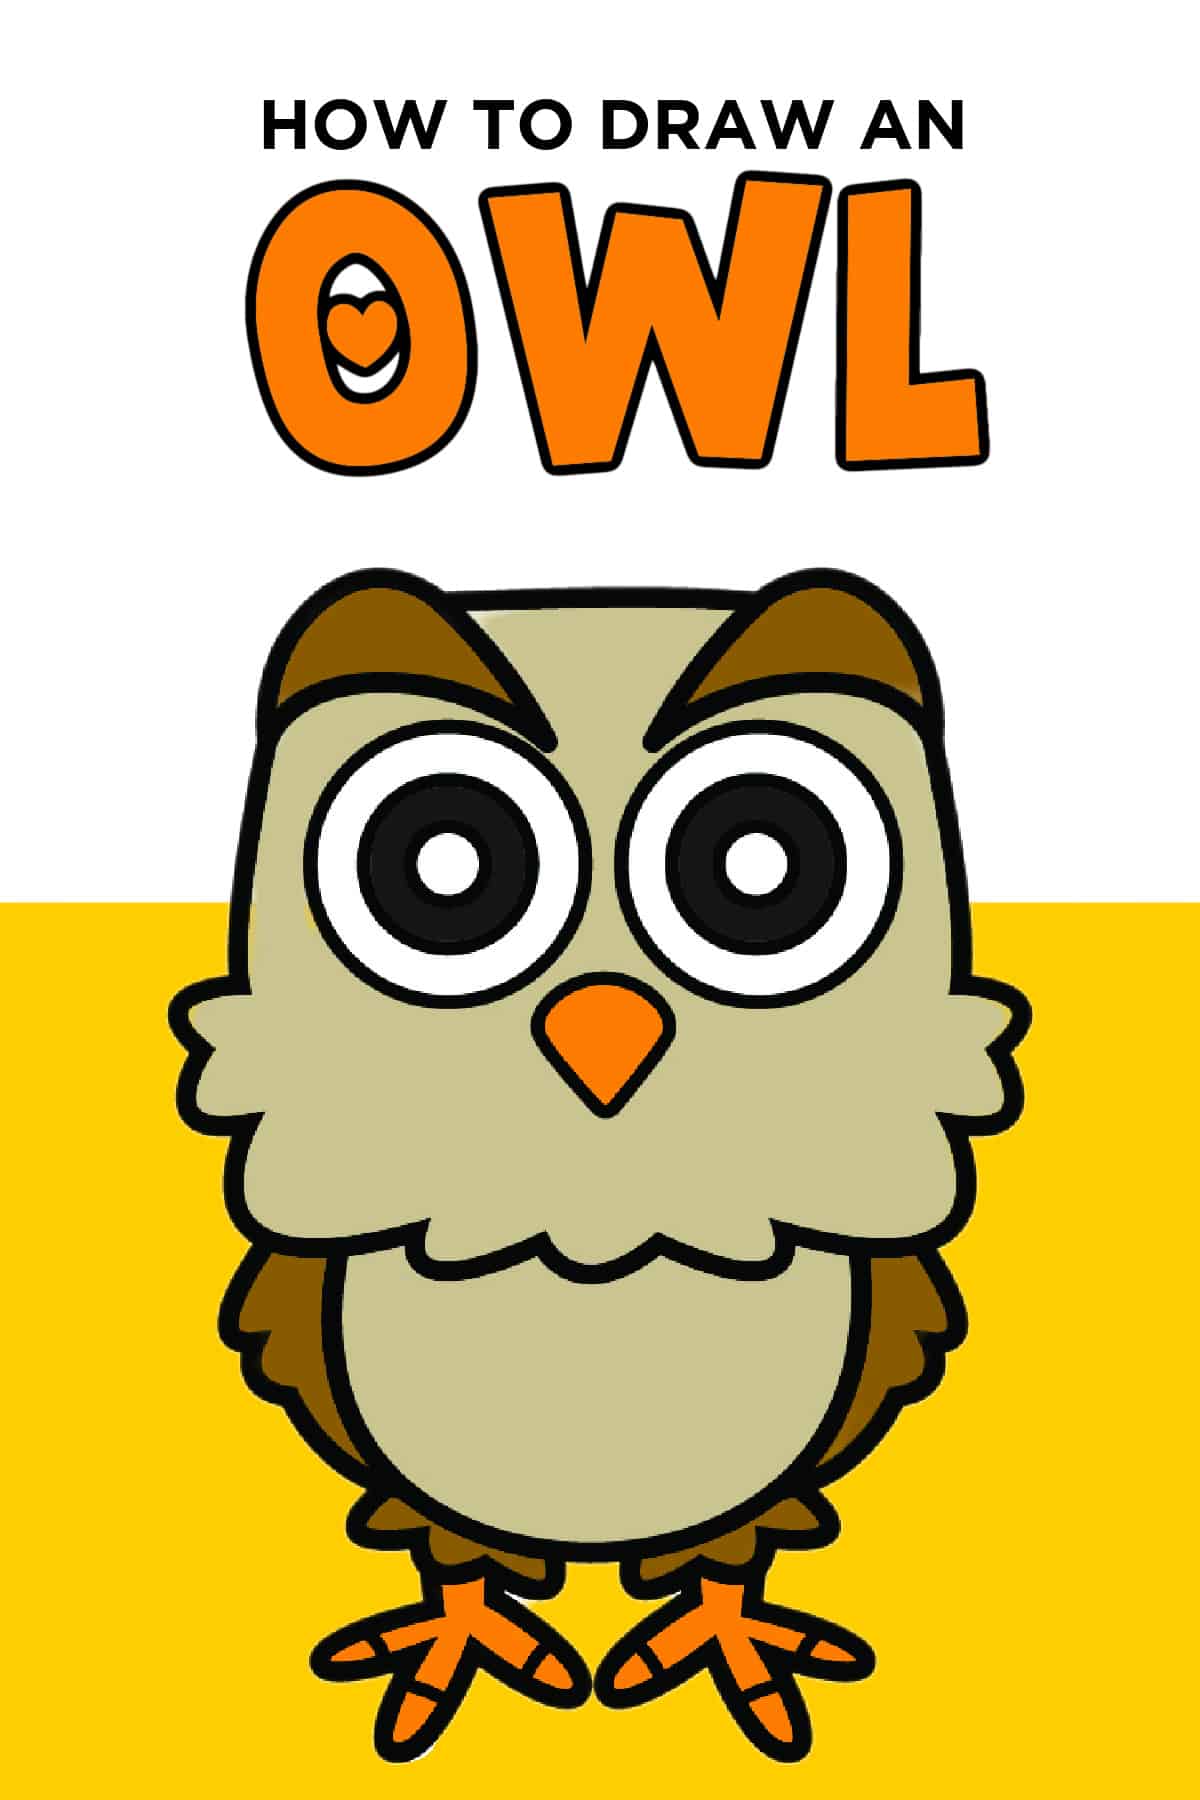 Owl bird on a branch sketch hand drawn in doodle Vector Image